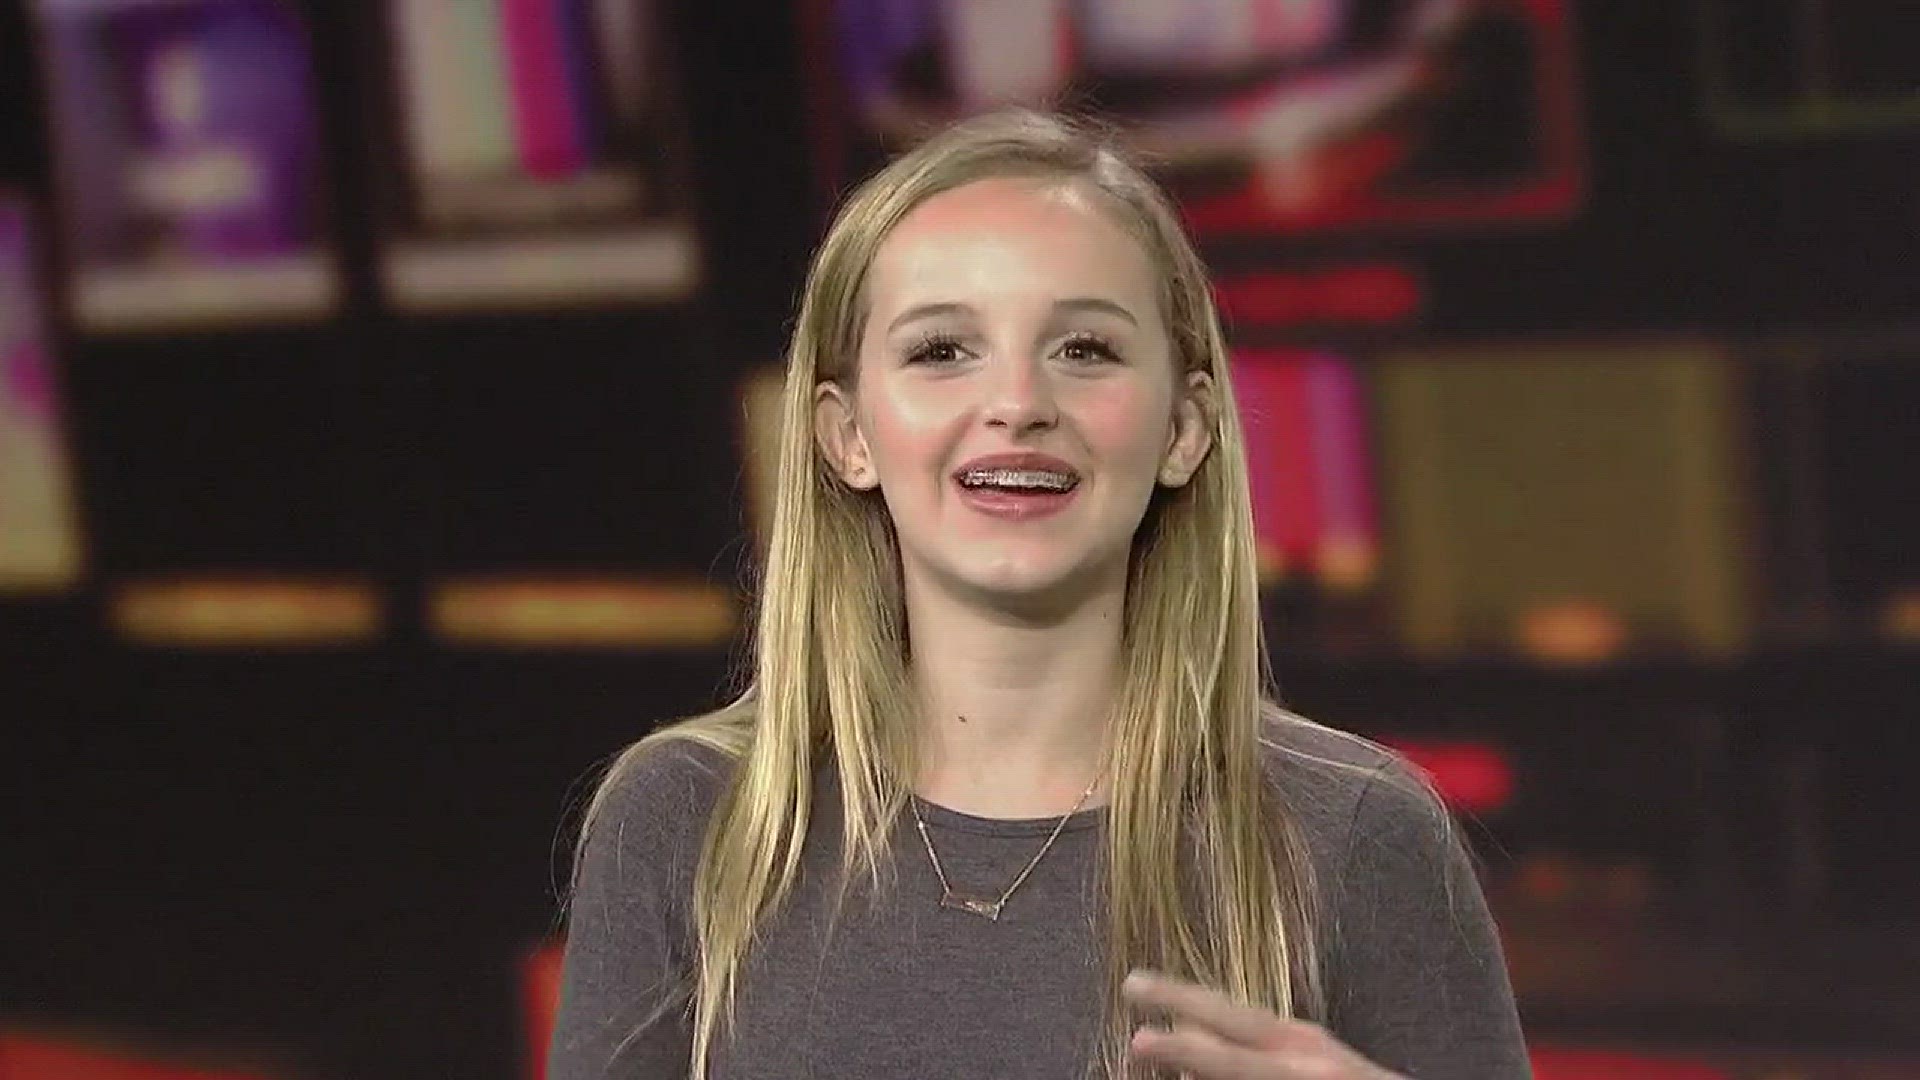 Arizona's Evie Clair explains what life has been like since the end of "America's Got Talent."